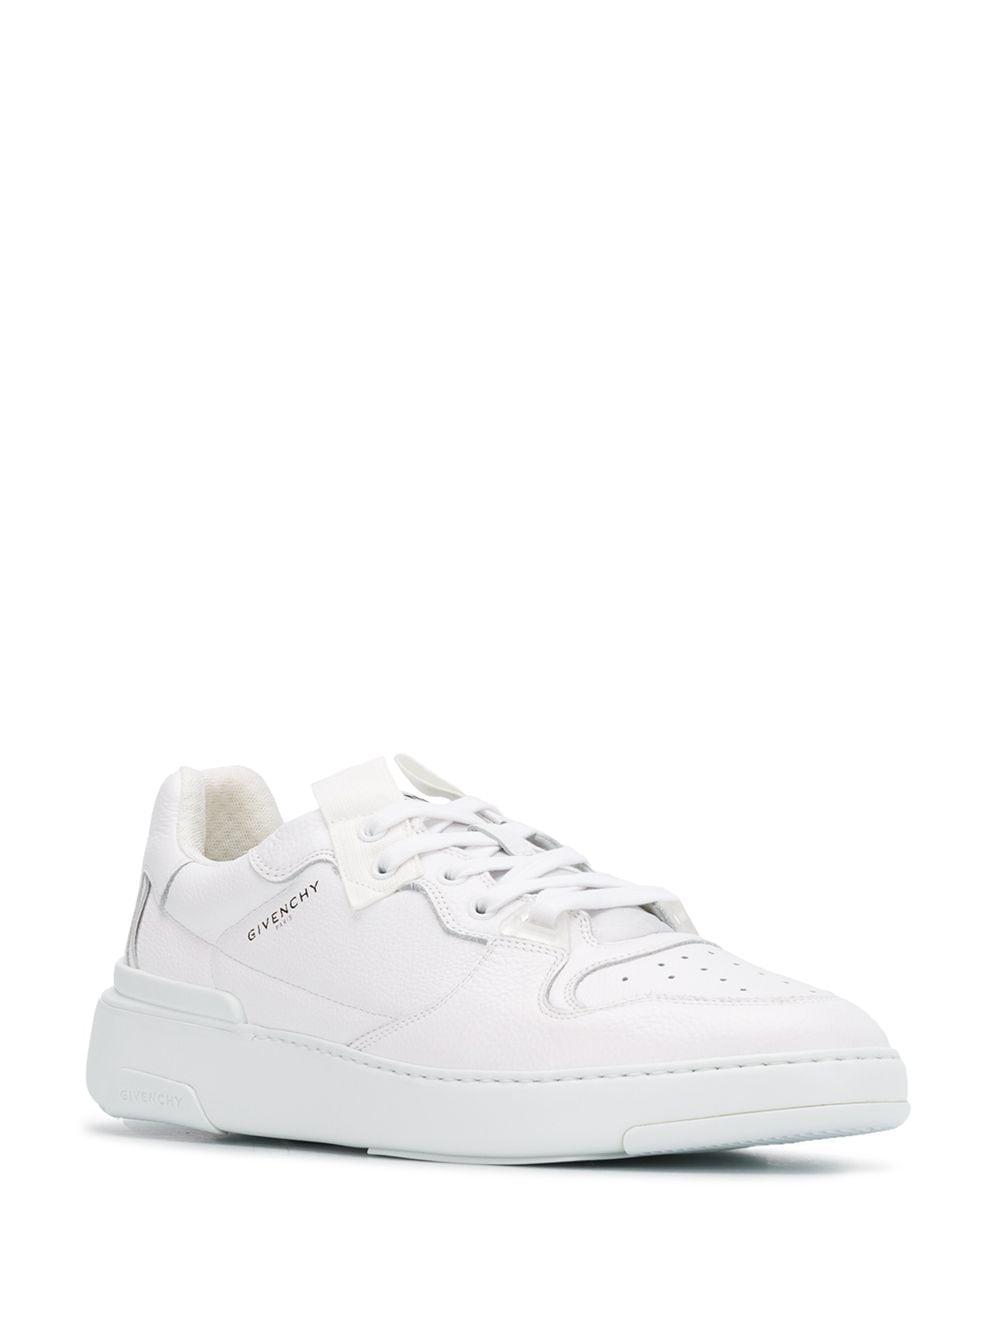 givenchy low top sneakers white